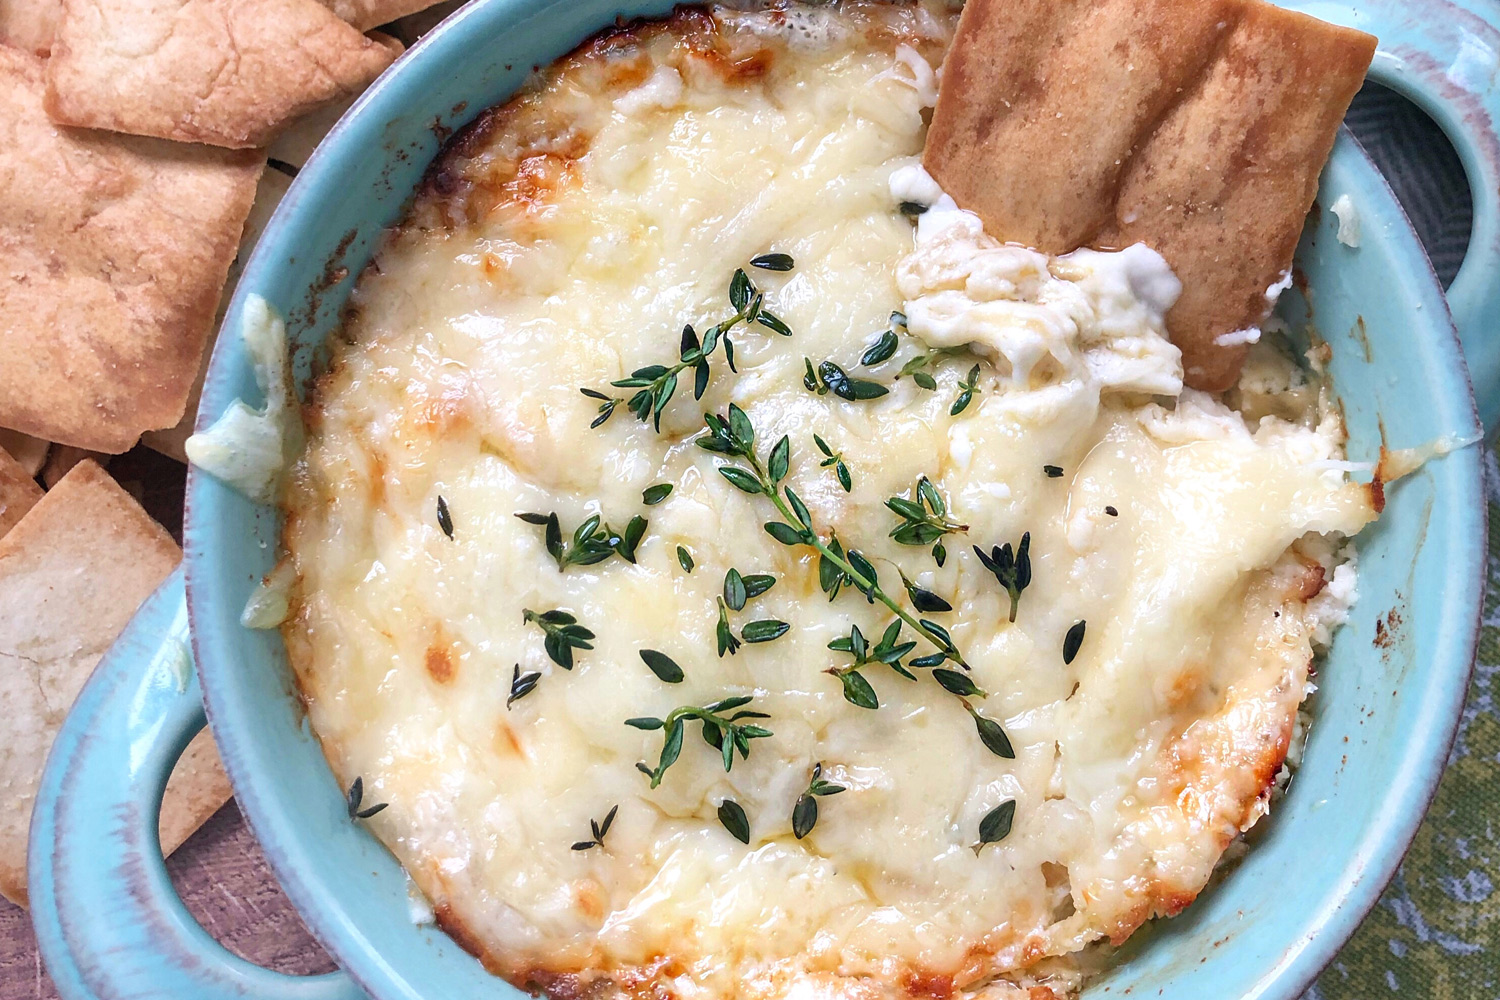 Hot French Onion Dip